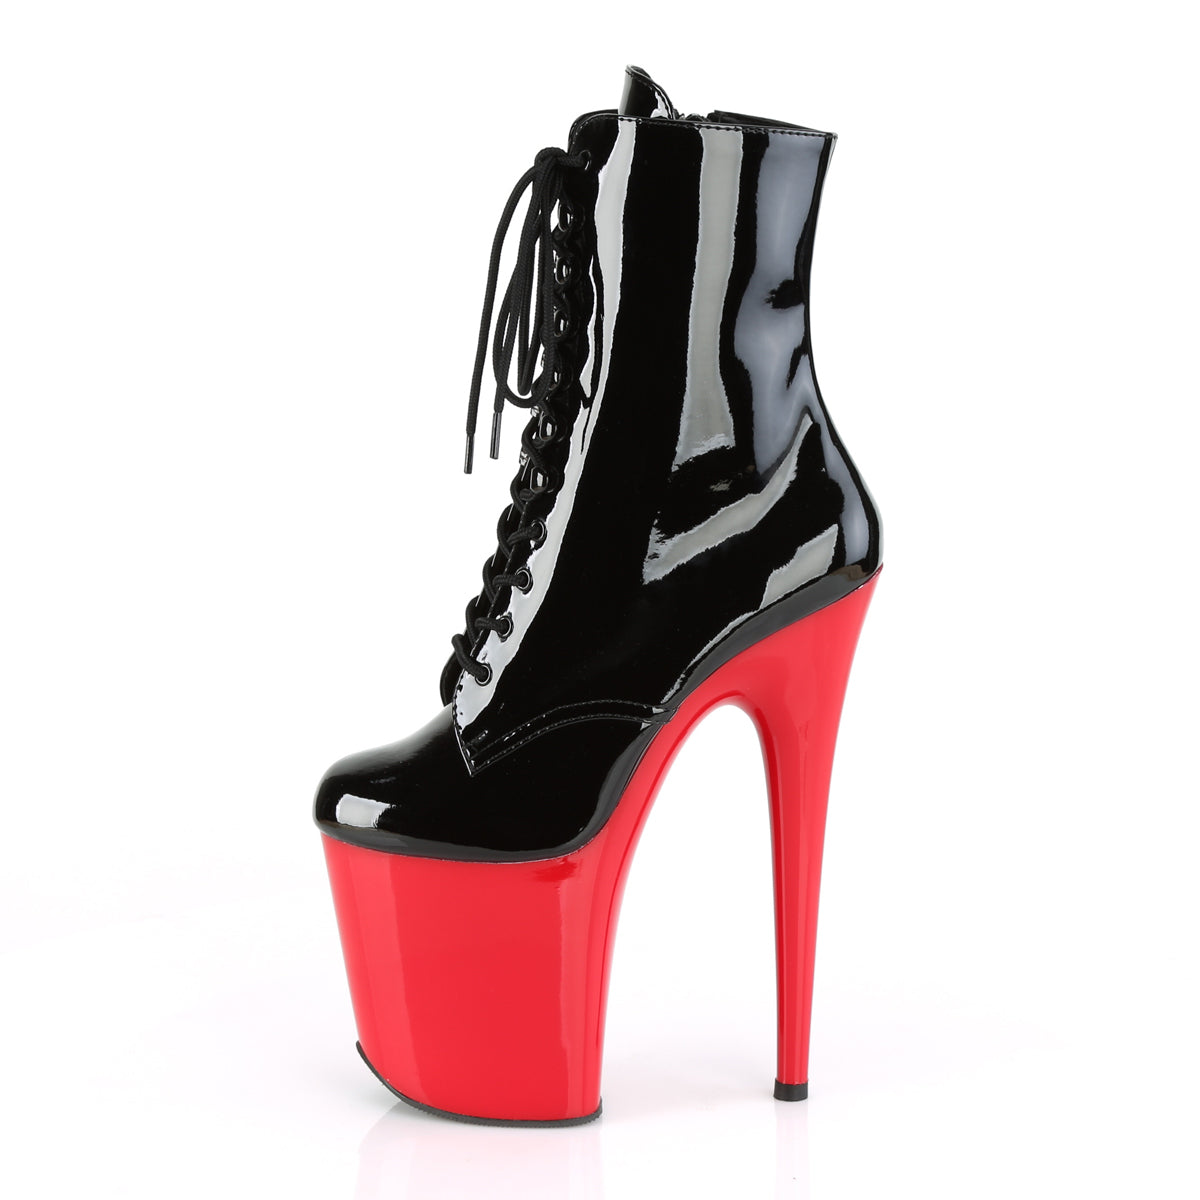 Flamingo-1020 8 Inches Black Red Platform Boots